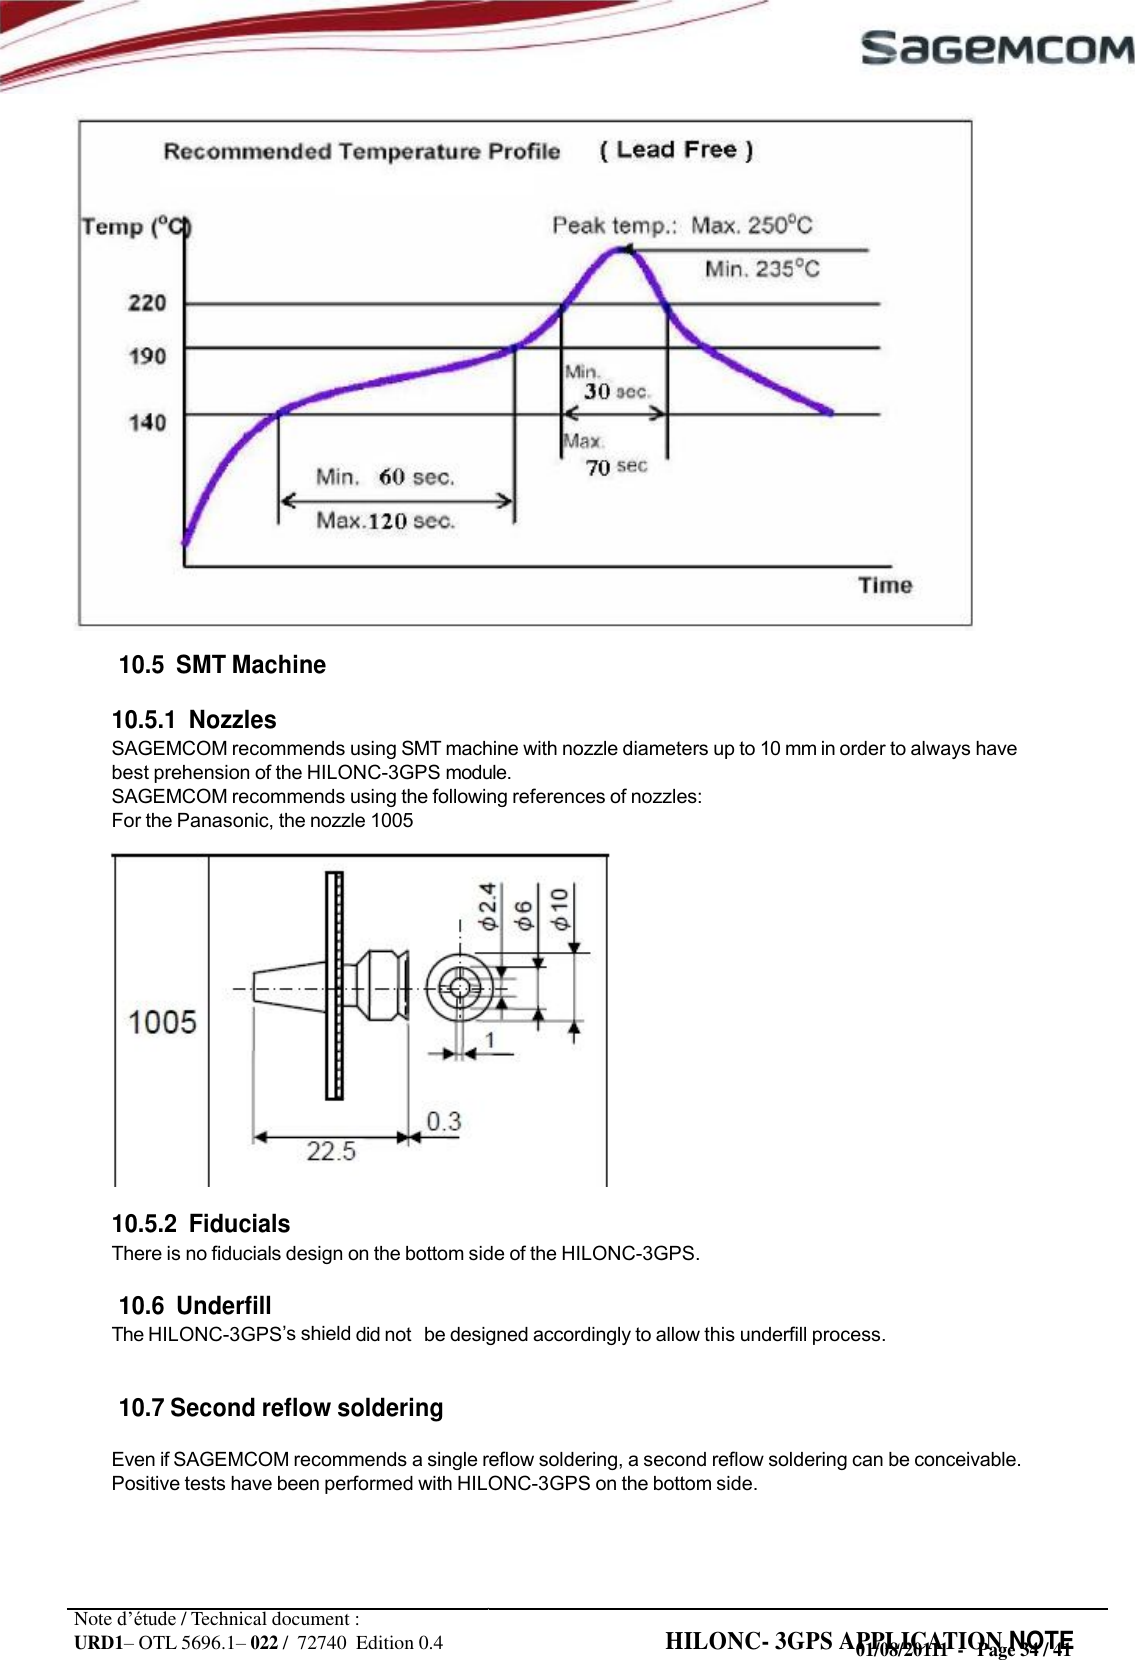 URD1– OTL 5696.1– 022 /  72740  Edition 0.4 HILONC- 3GPS APPLICATION NOTE                            10.5  SMT Machine  10.5.1  Nozzles SAGEMCOM recommends using SMT machine with nozzle diameters up to 10 mm in order to always have best prehension of the HILONC-3GPS module. SAGEMCOM recommends using the following references of nozzles: For the Panasonic, the nozzle 1005                10.5.2  Fiducials There is no fiducials design on the bottom side of the HILONC-3GPS.  10.6  Underfill The HILONC-3GPS shield did not   be designed accordingly to allow this underfill process.   10.7 Second reflow soldering  Even if SAGEMCOM recommends a single reflow soldering, a second reflow soldering can be conceivable. Positive tests have been performed with HILONC-3GPS on the bottom side.     Note d’étude / Technical document : 01/08/20111  -   Page 34 / 41